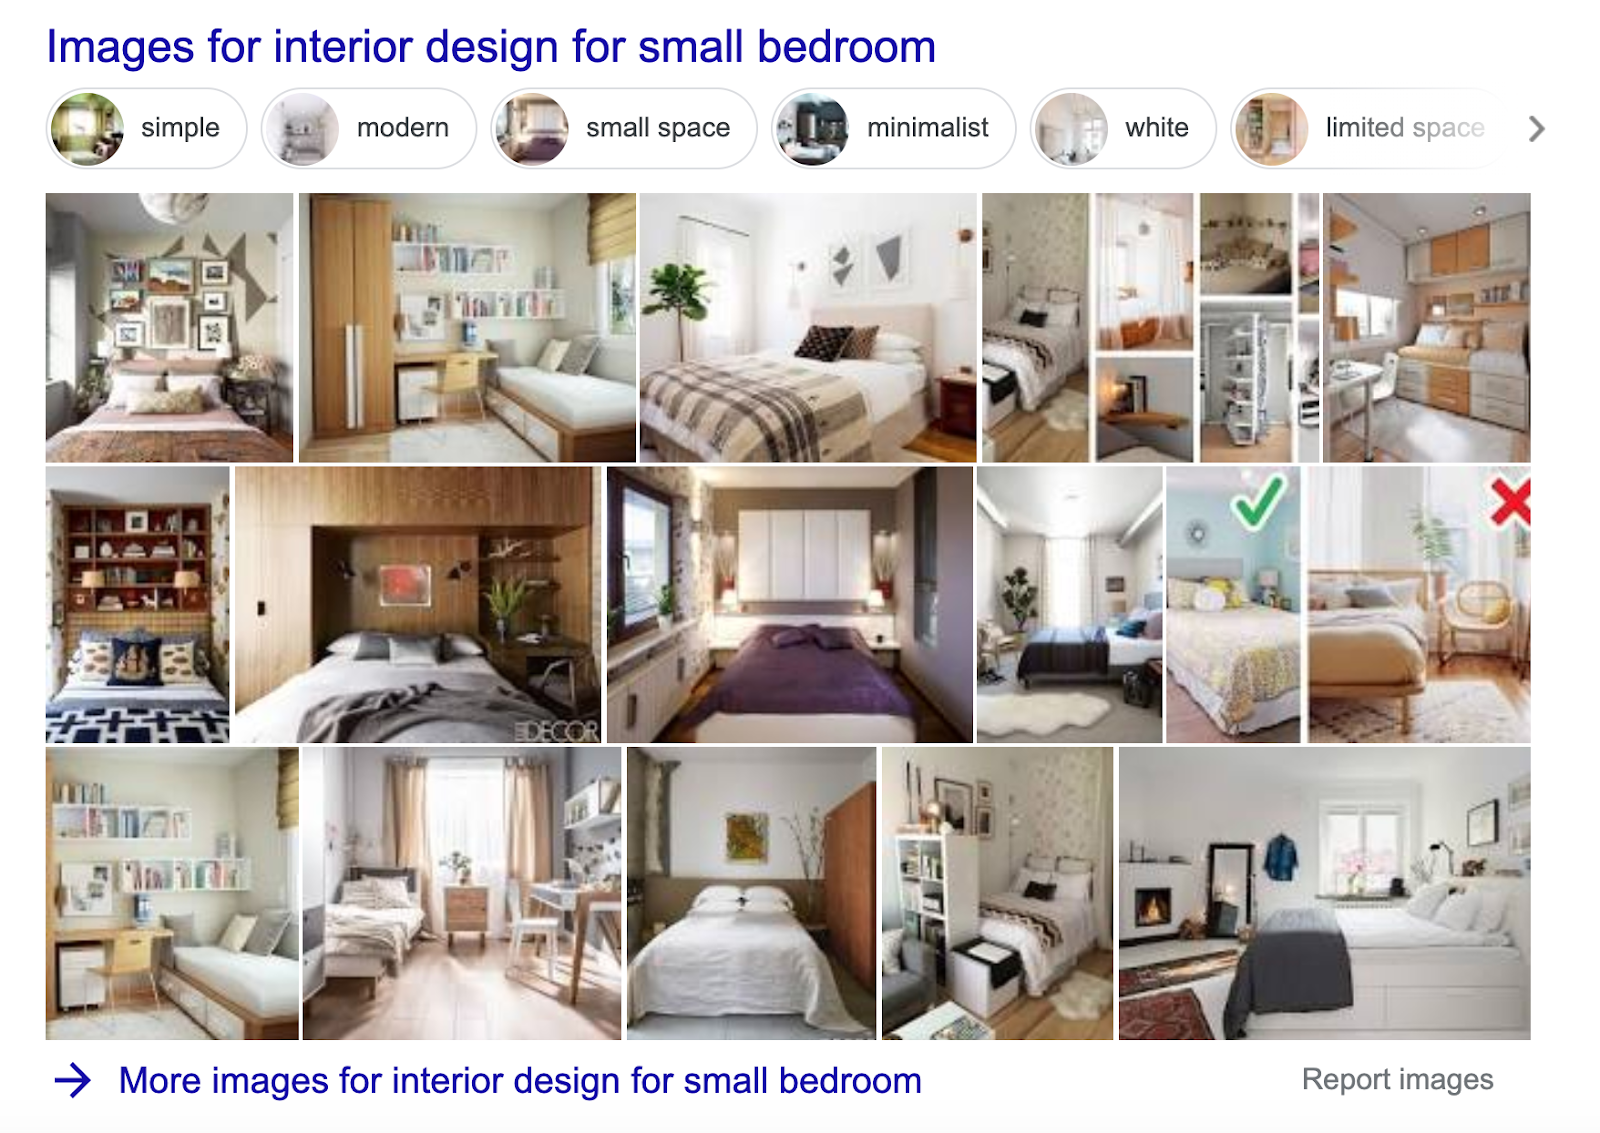 image pack in the interior design for small bedroom SERP